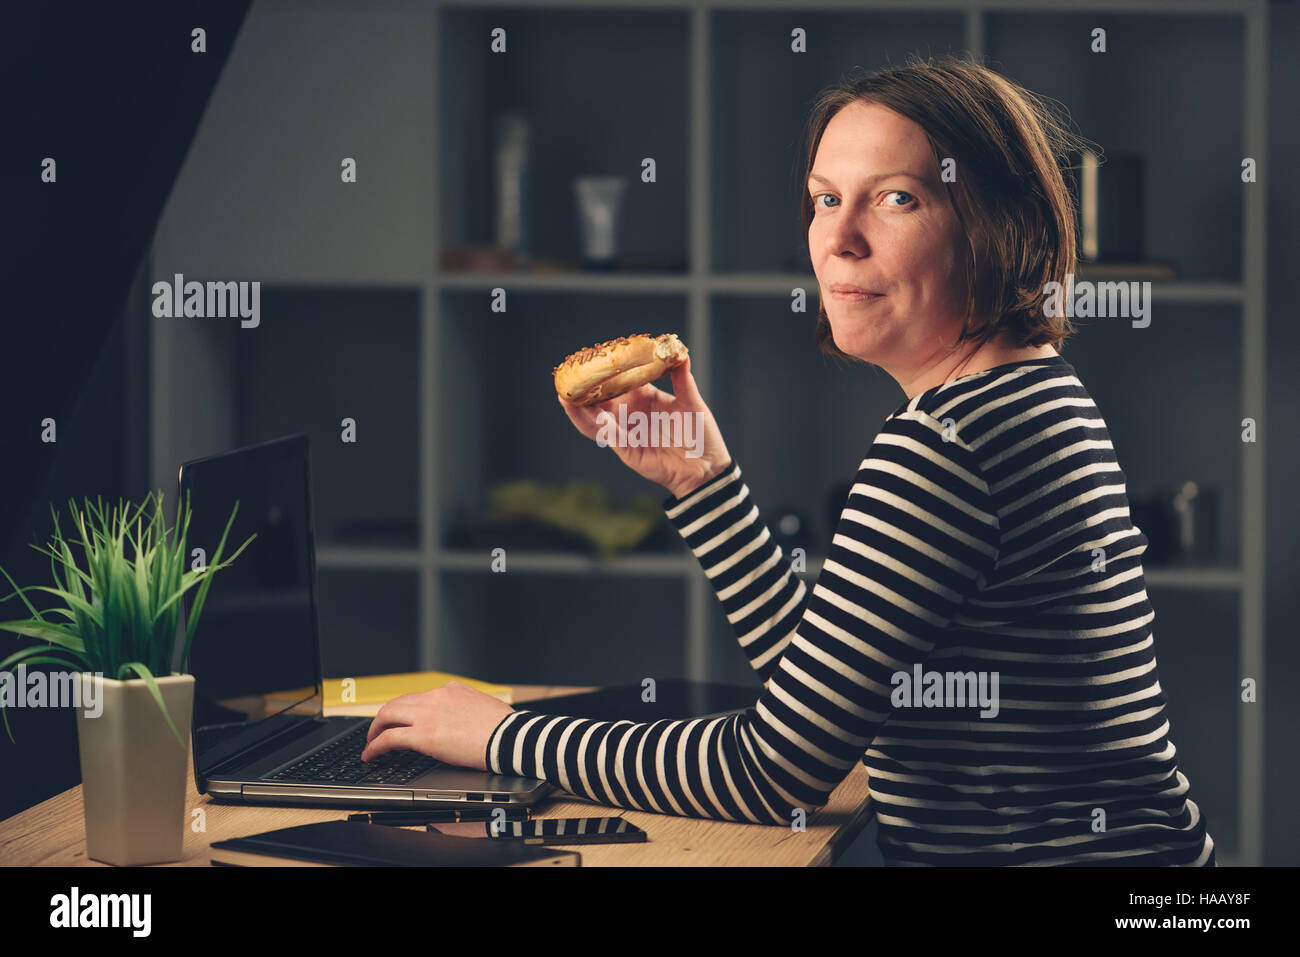 Woman eating sesame bagel in office while working overtime on laptop computer Stock Photo